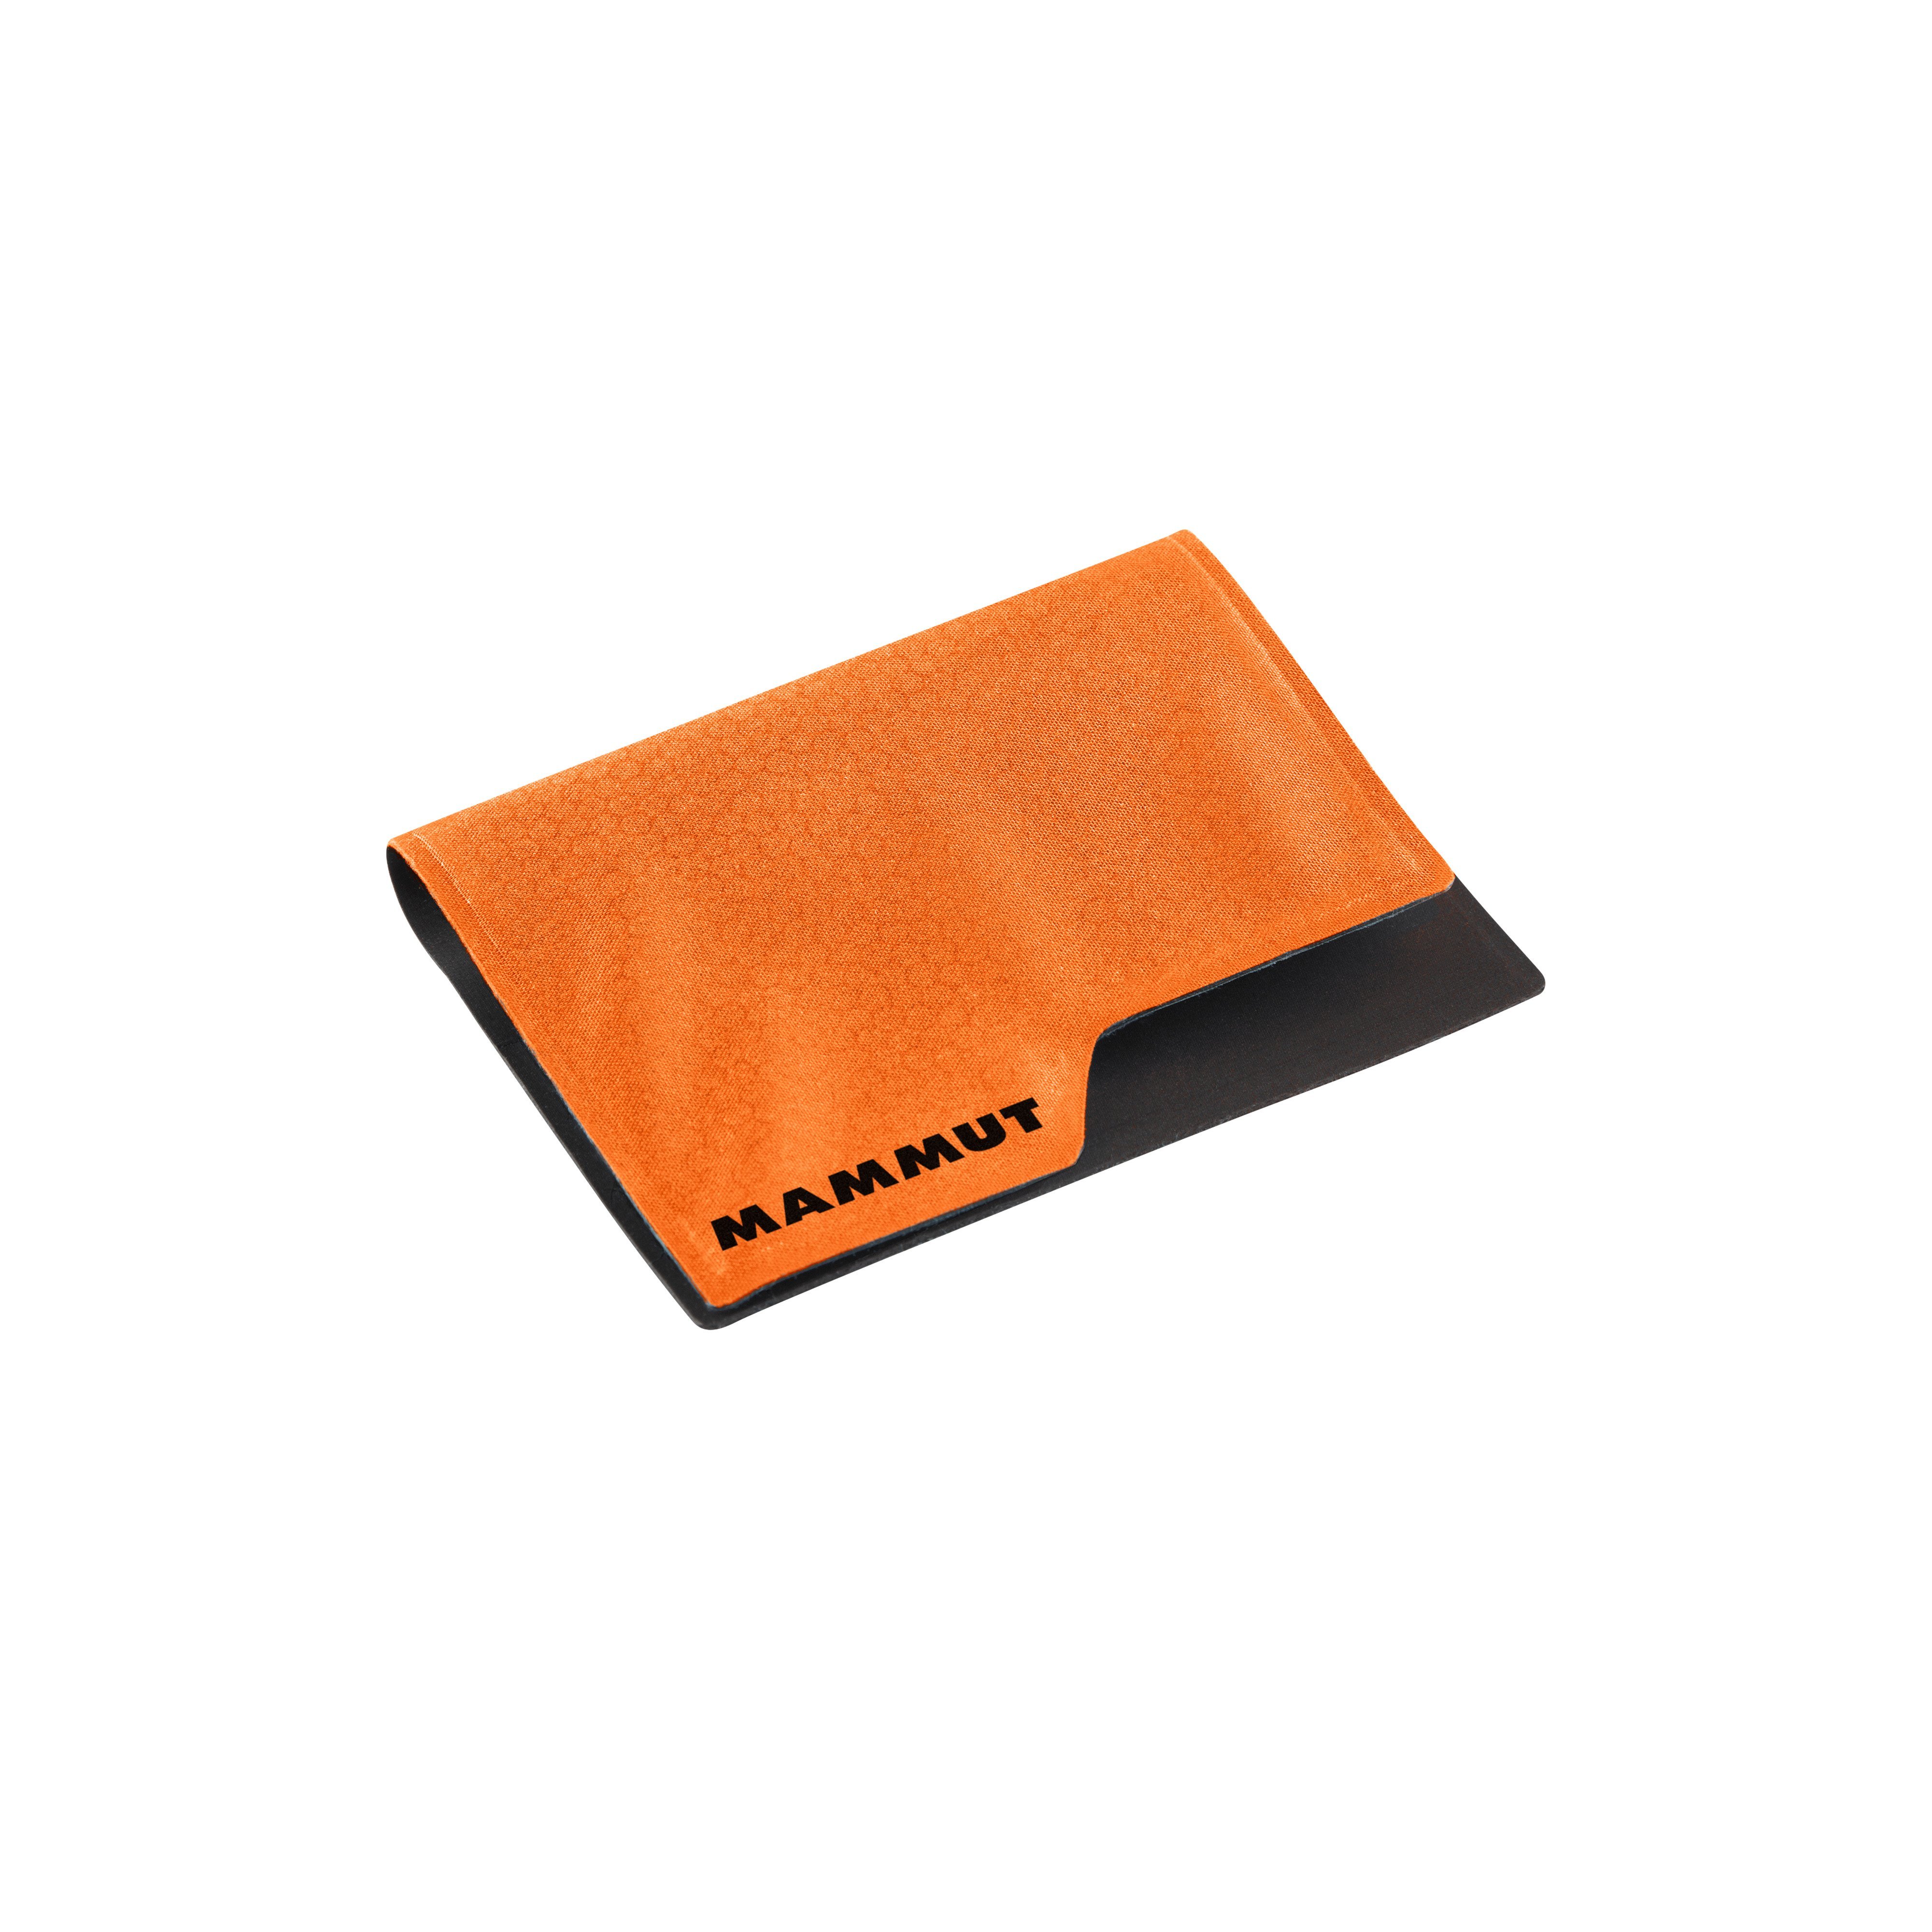 Smart Wallet Ultralight - zion, one size product image